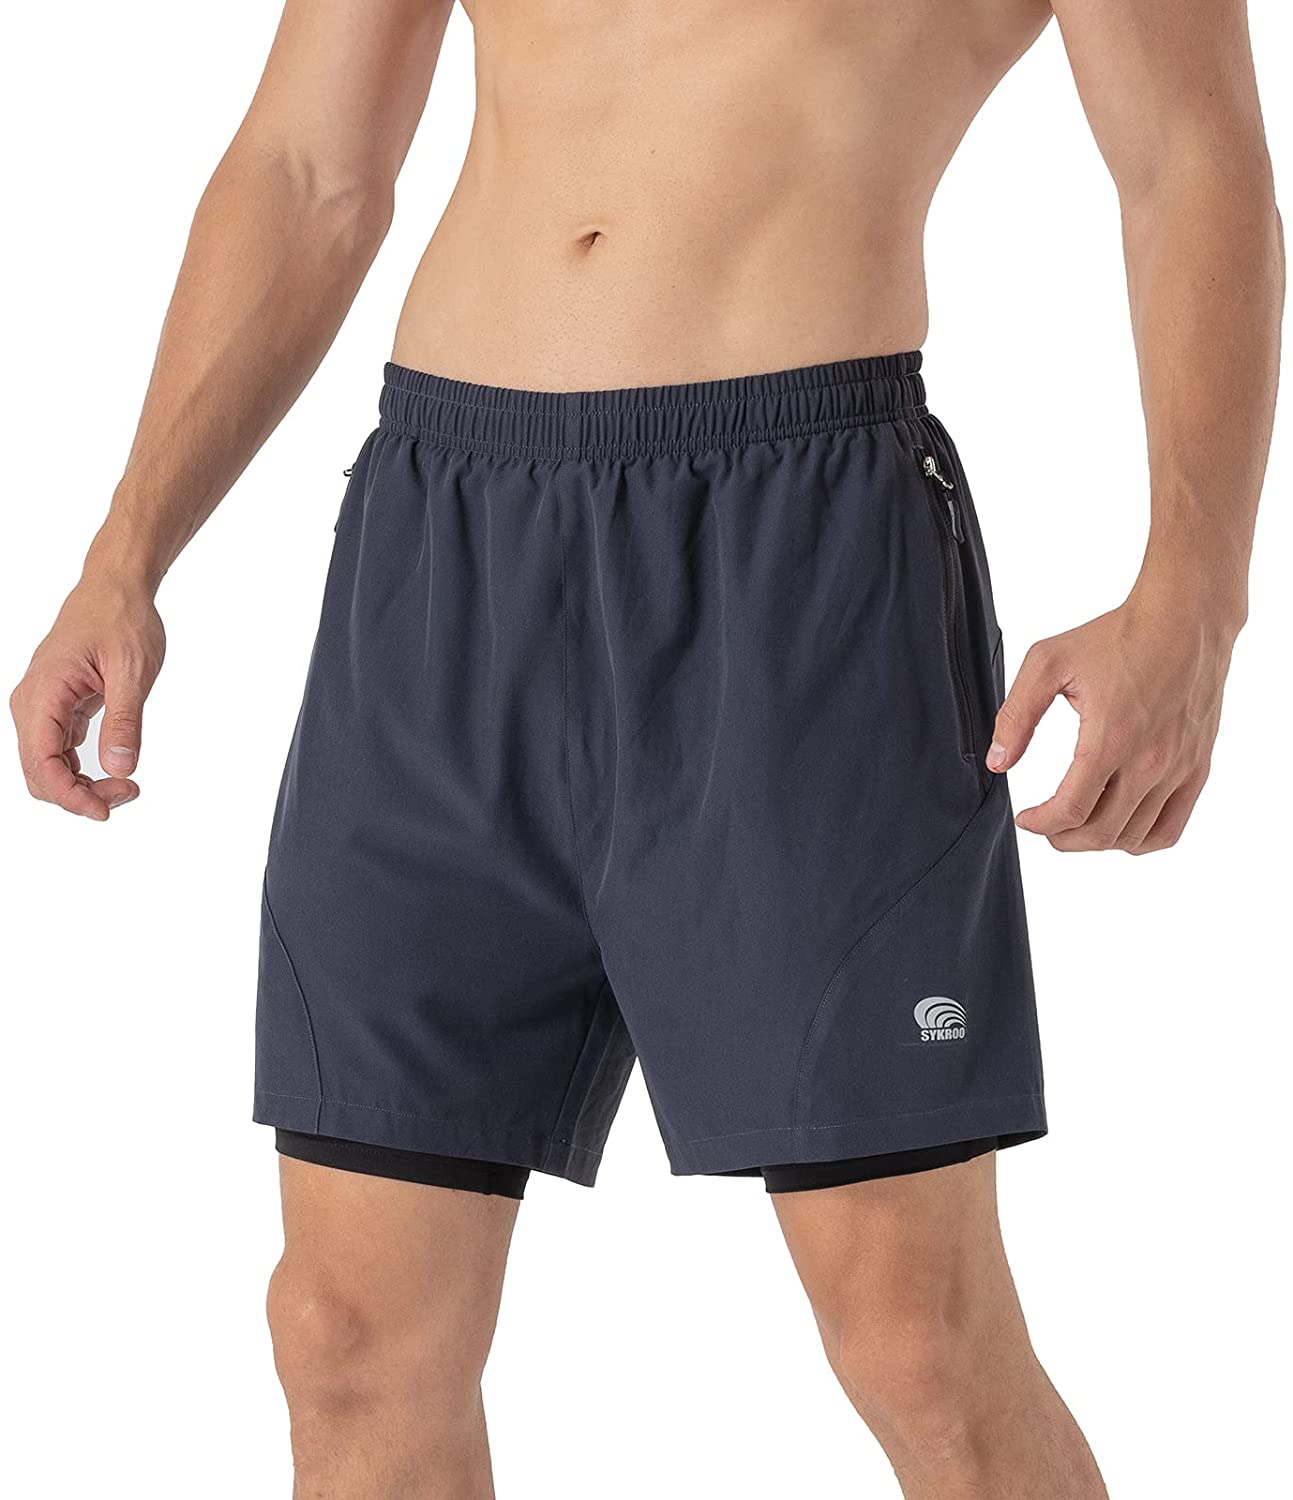 Men's 2 in 1 Running Shorts 5 inch Quick Dry Workout Athletic Shorts with Zipper Pockets 